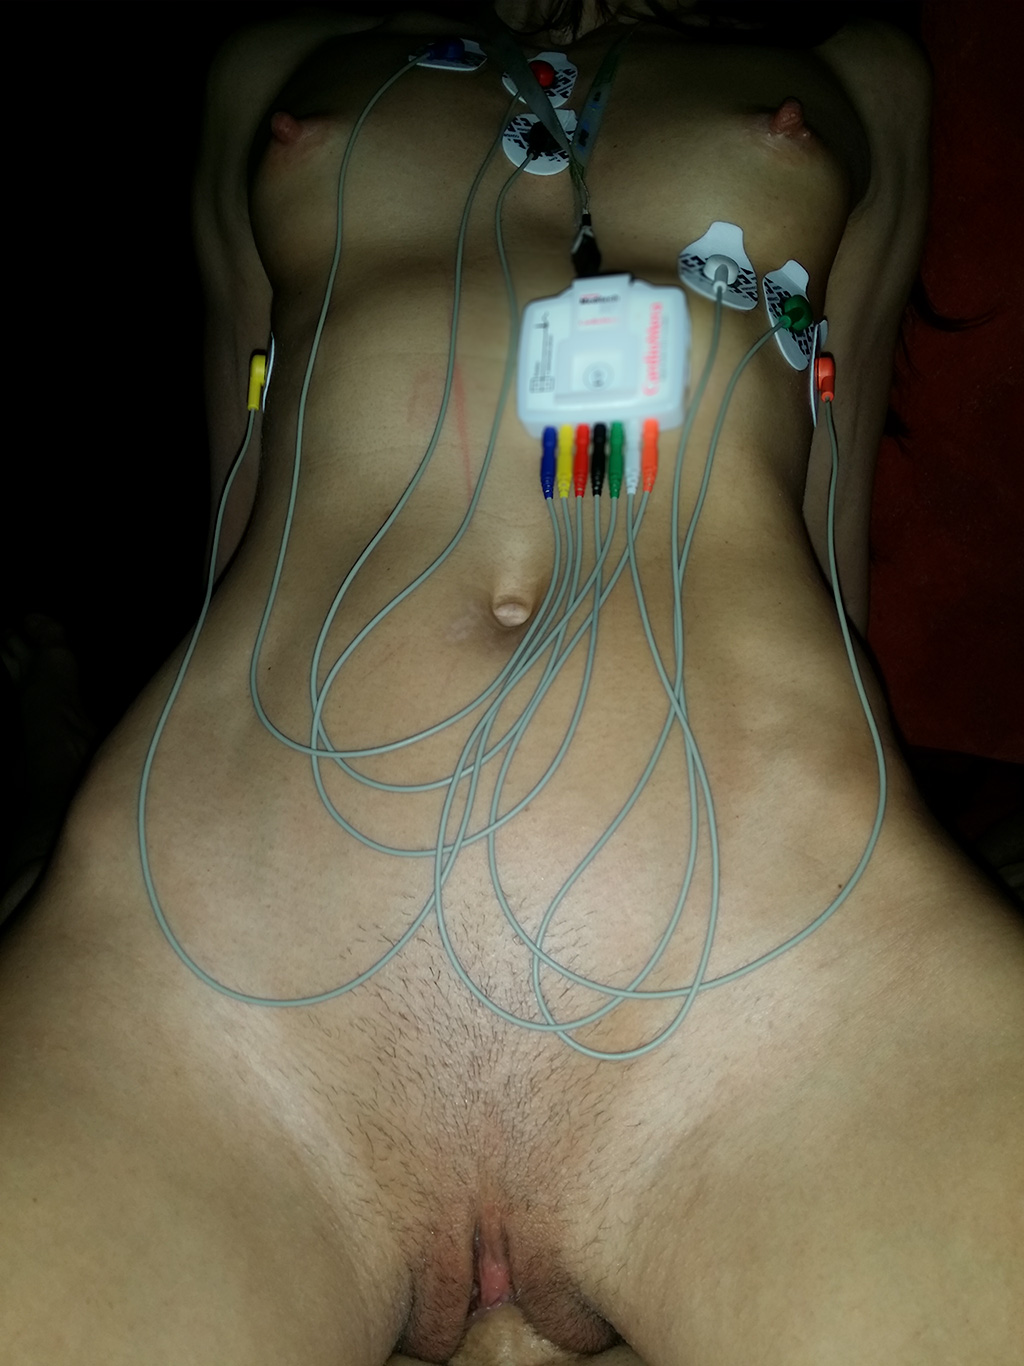 Holter sex this morning QS Personal BDSM Blog